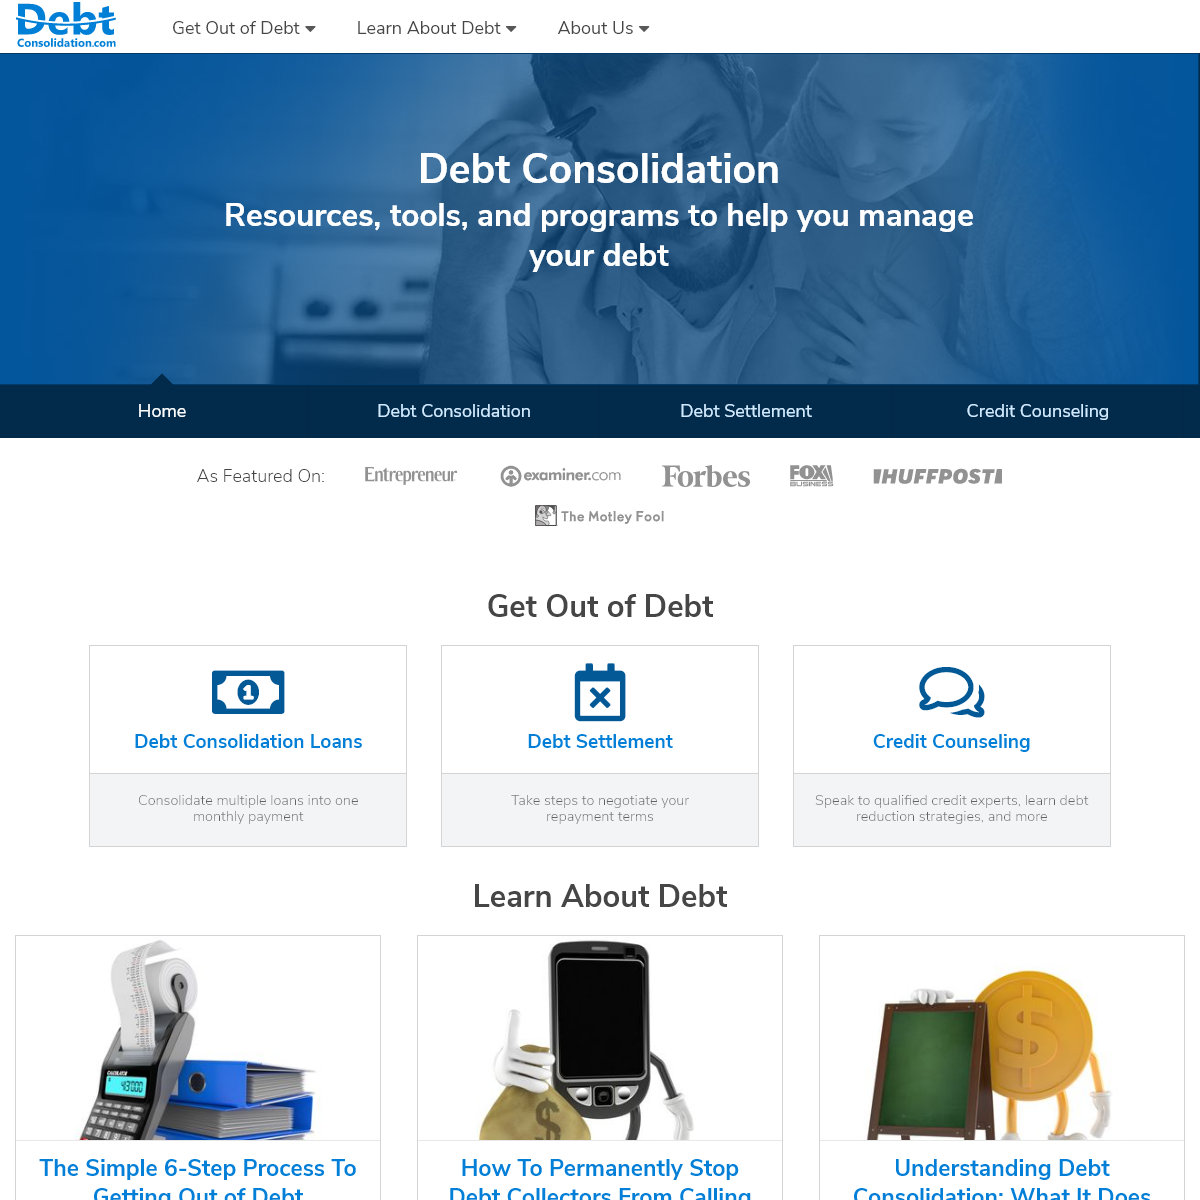 A complete backup of debtconsolidation.com